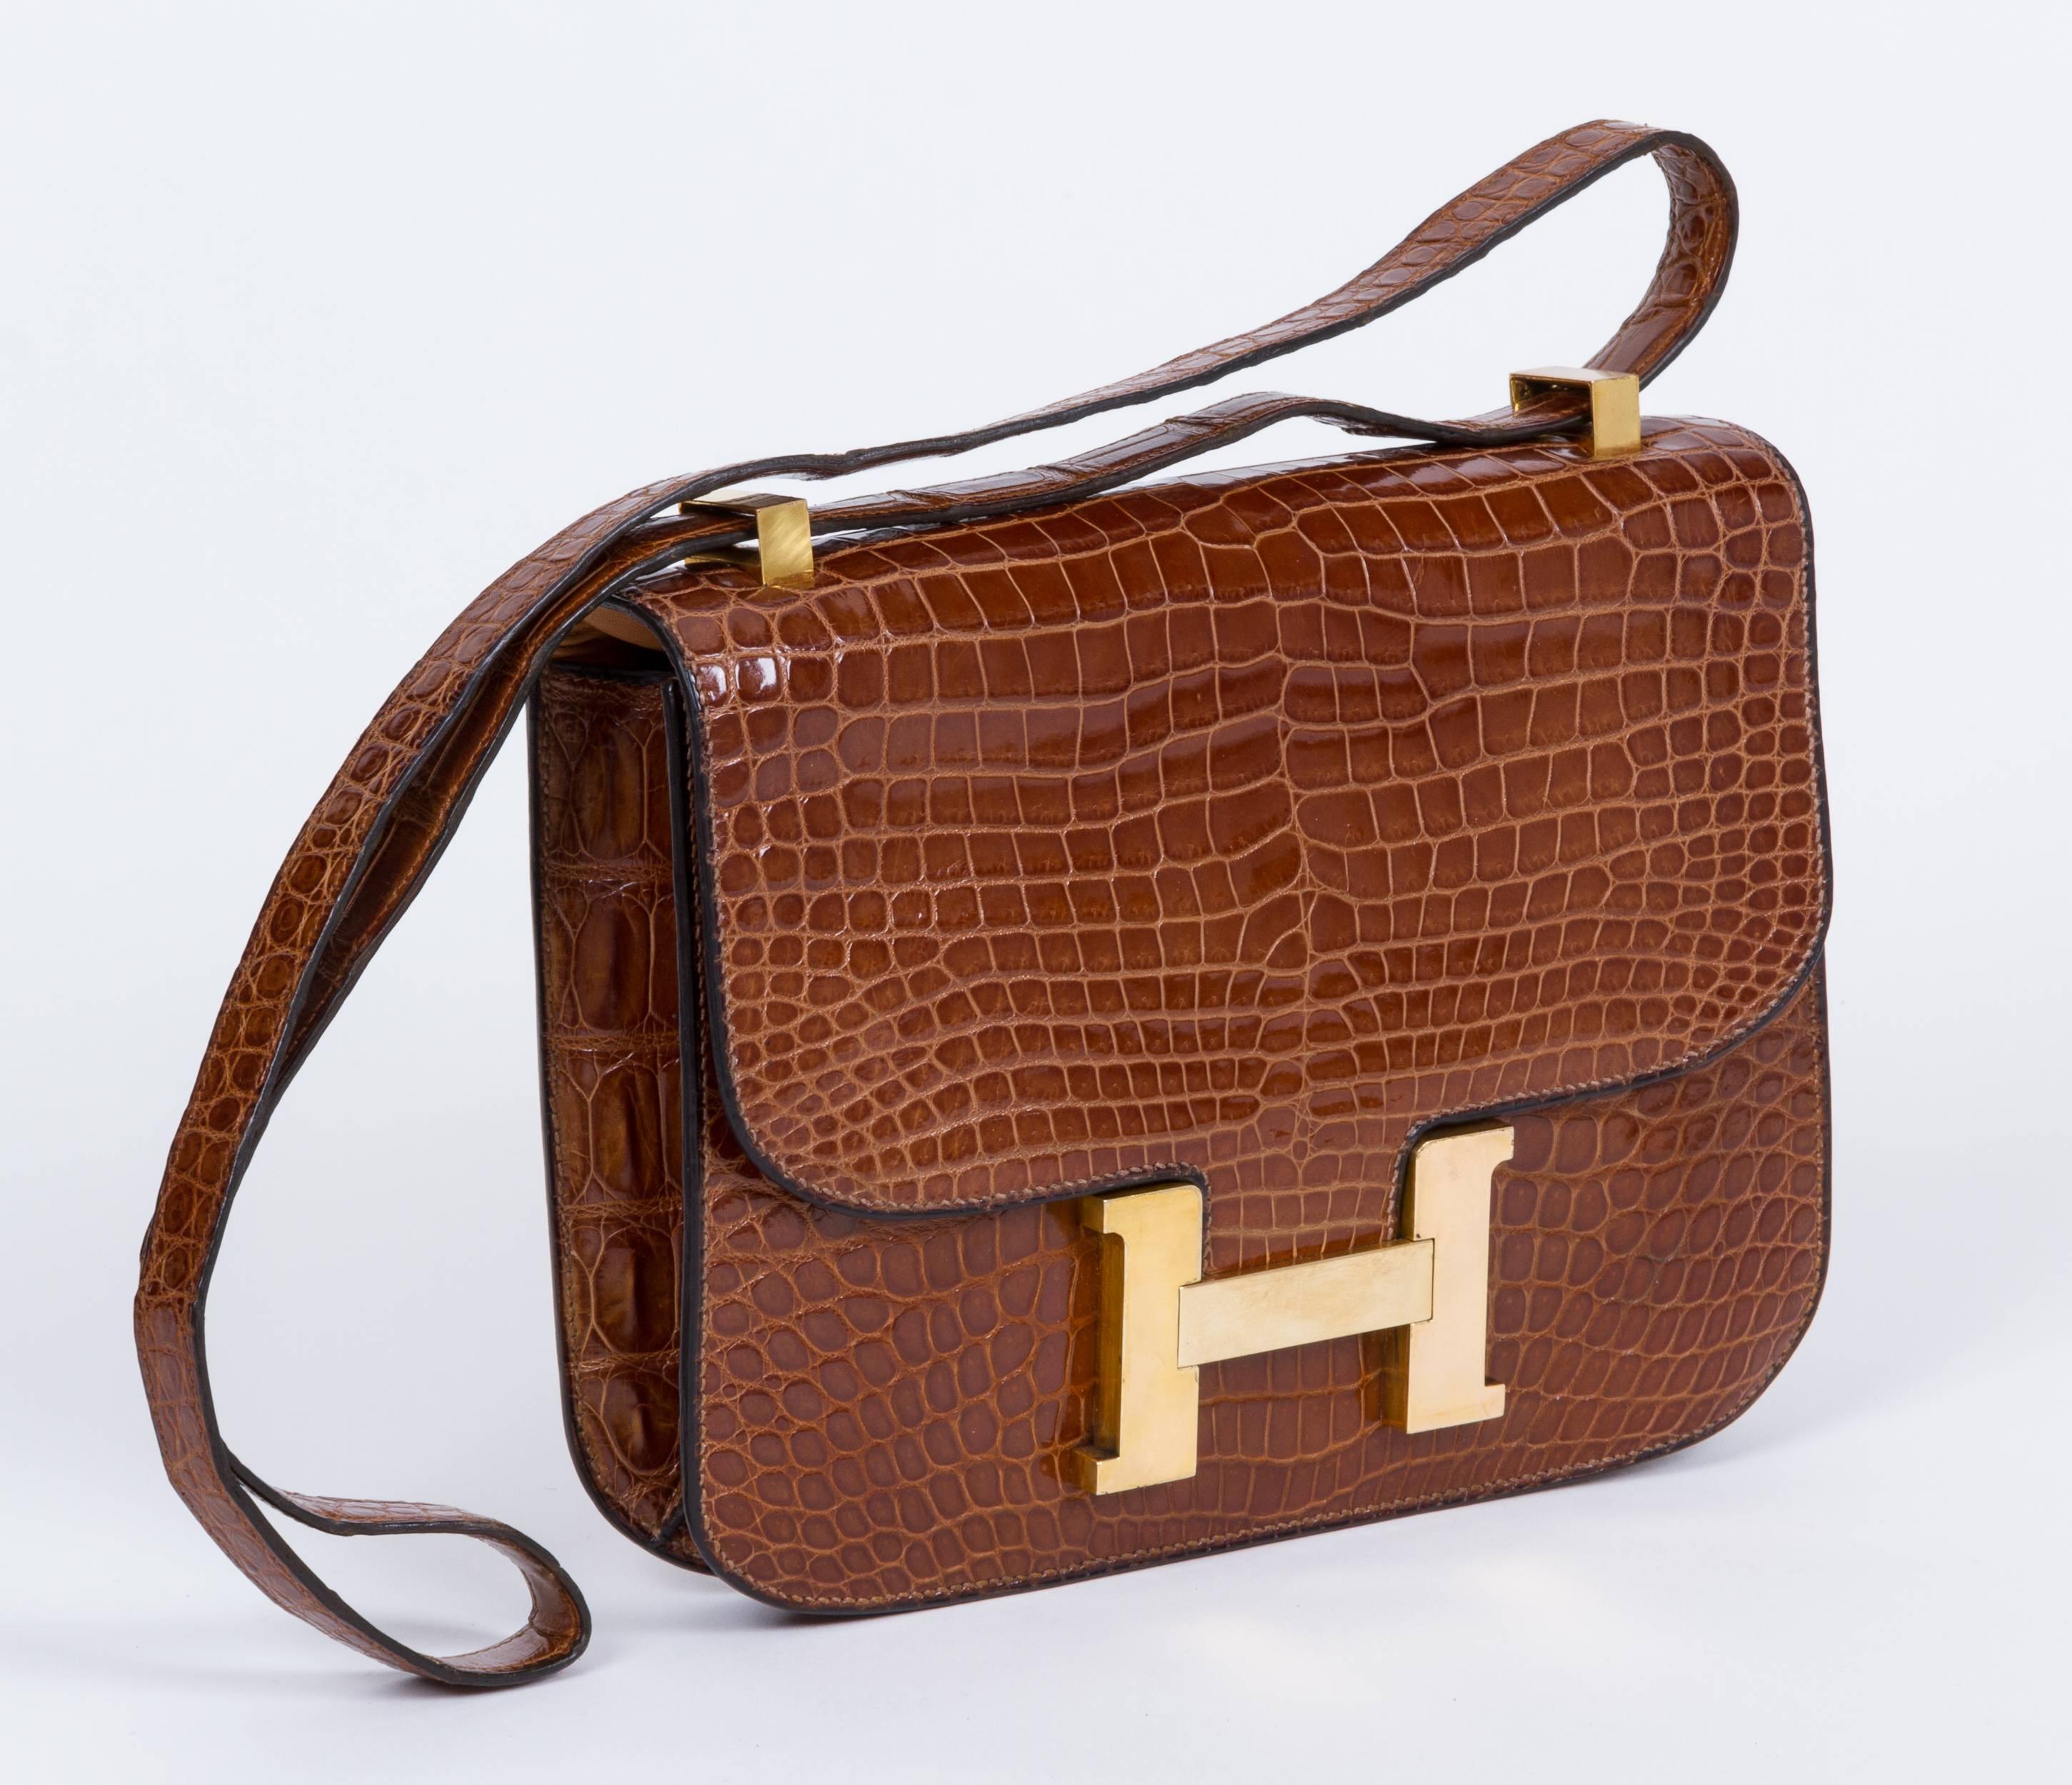 Hermes classic and beautiful vintage crocodile miel constance bag. Pre stamp production. Crocodile leather is in excellent condition, metal front H has minor scuffs. Shoulder drop 8.5